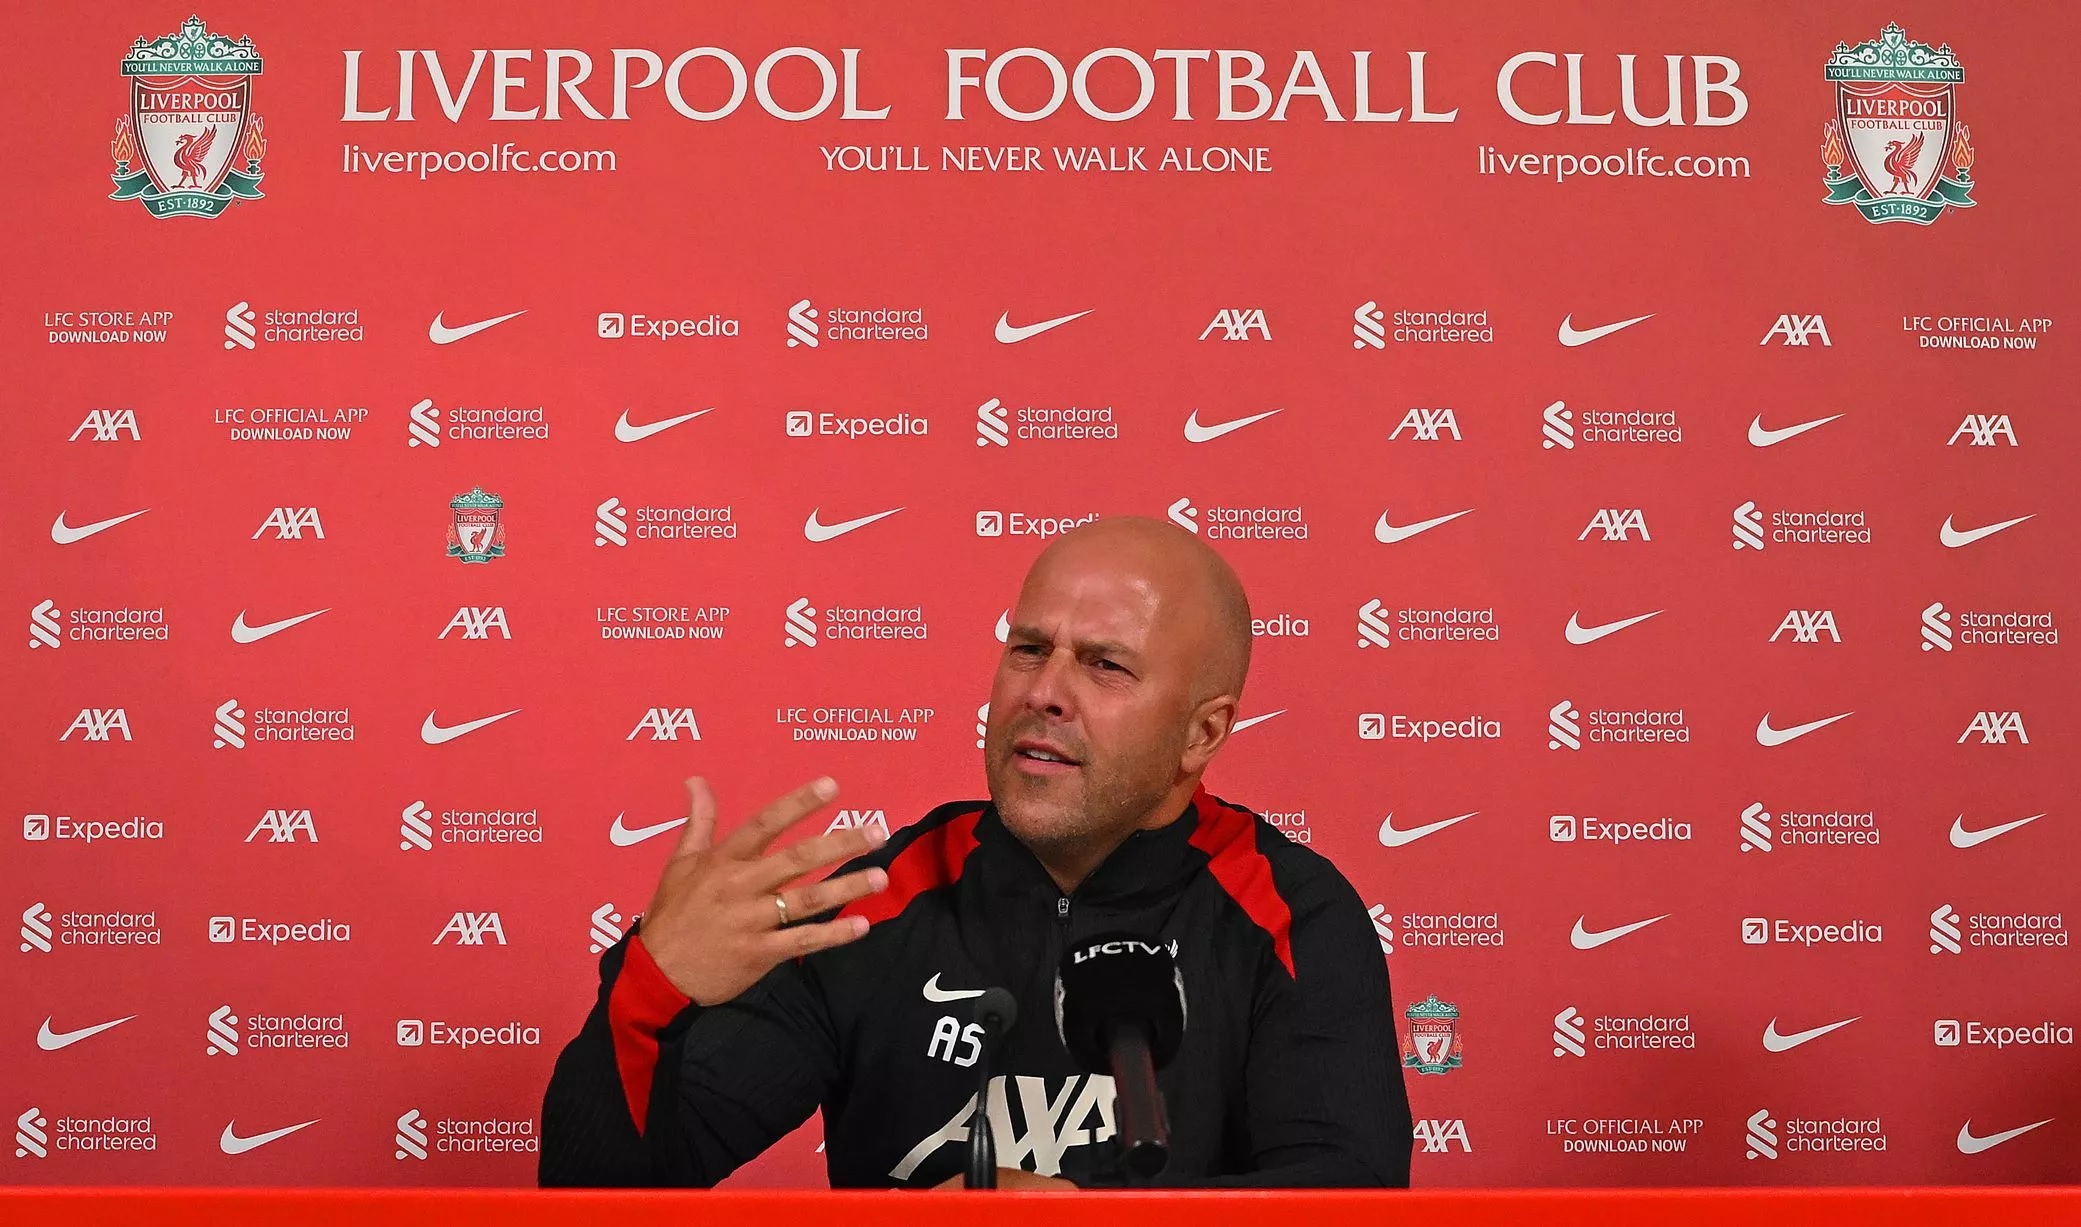 Major Arne Slot decision explains why Liverpool have not signed new players